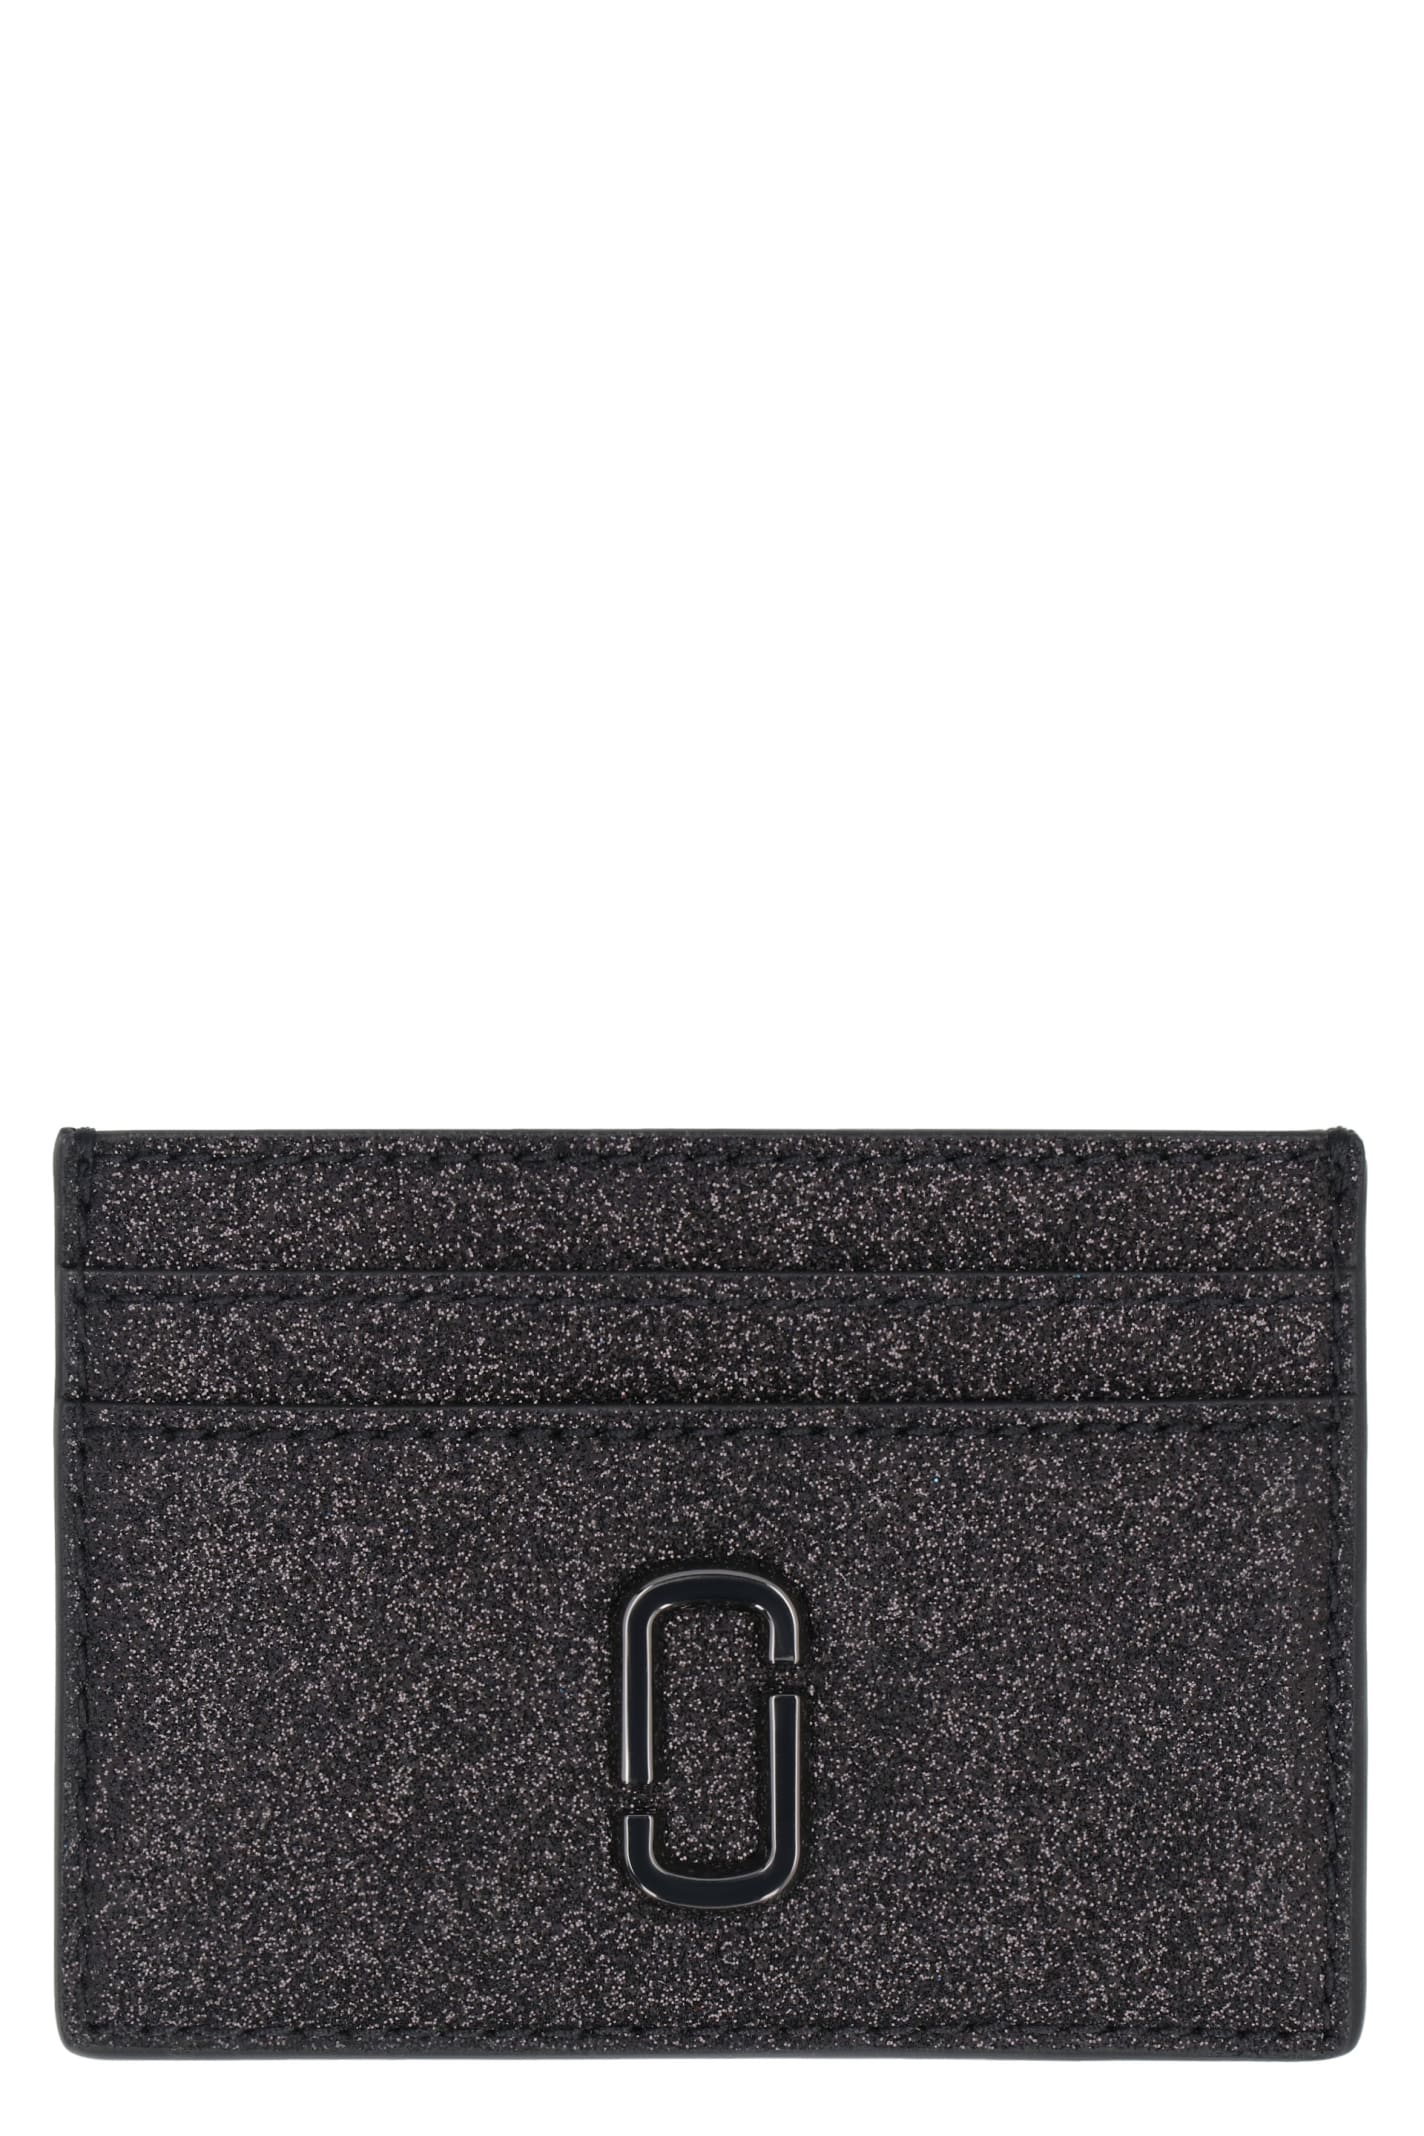 MARC JACOBS THE GALACTIC LEATHER CARD HOLDER